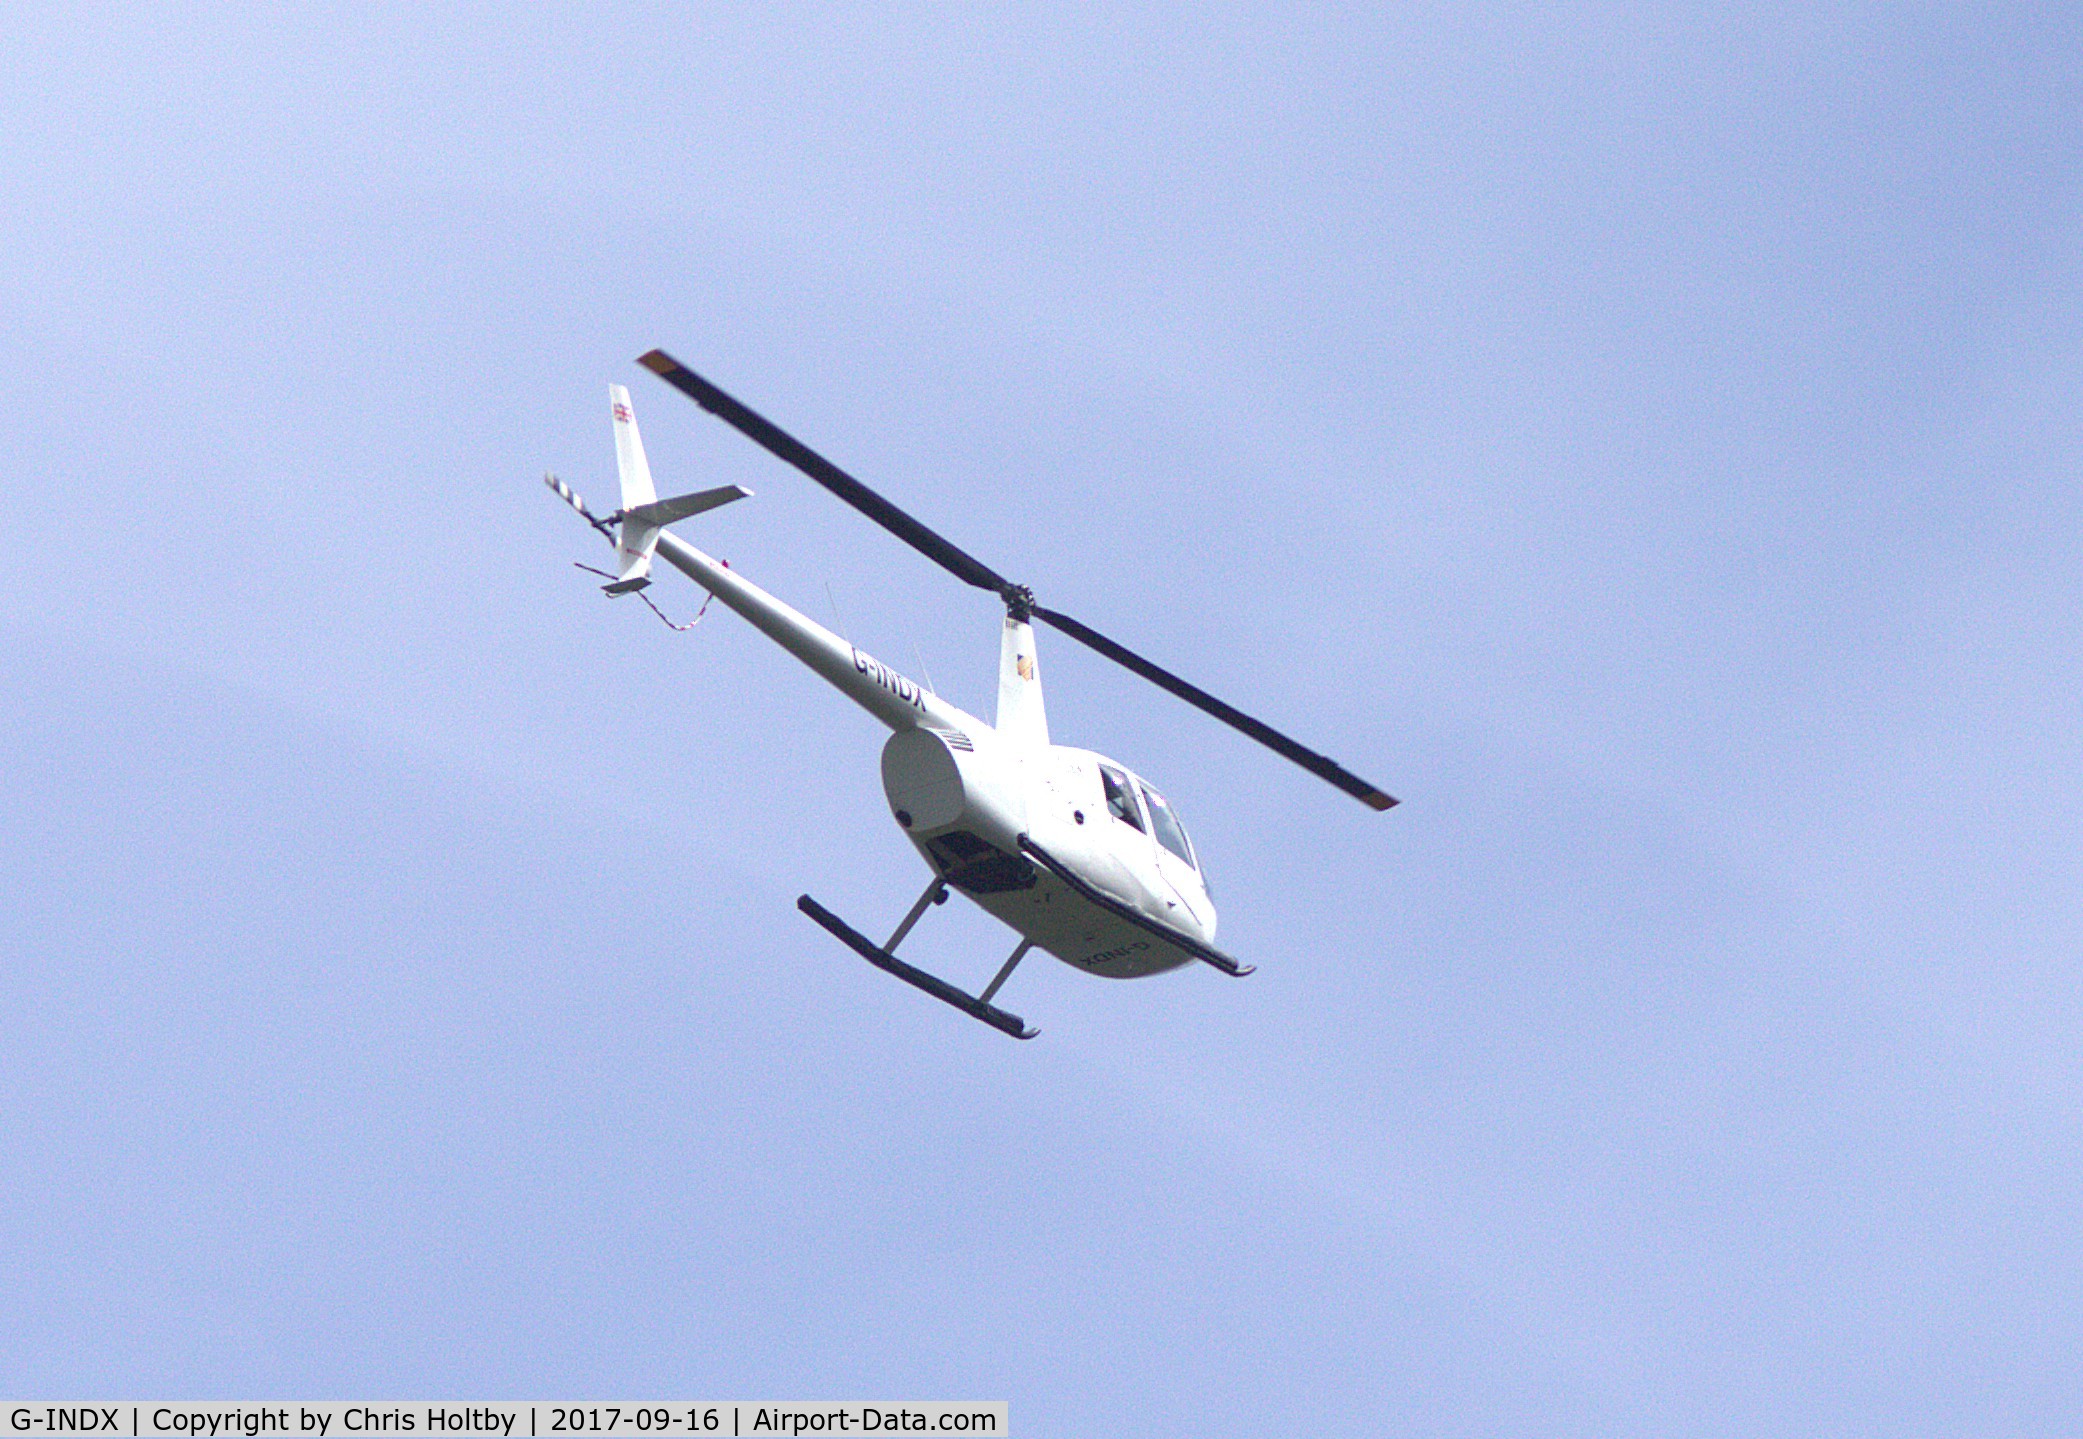 G-INDX, 2004 Robinson R44 Clipper II C/N 10491, Over Potters Bar, Herts showing new livery